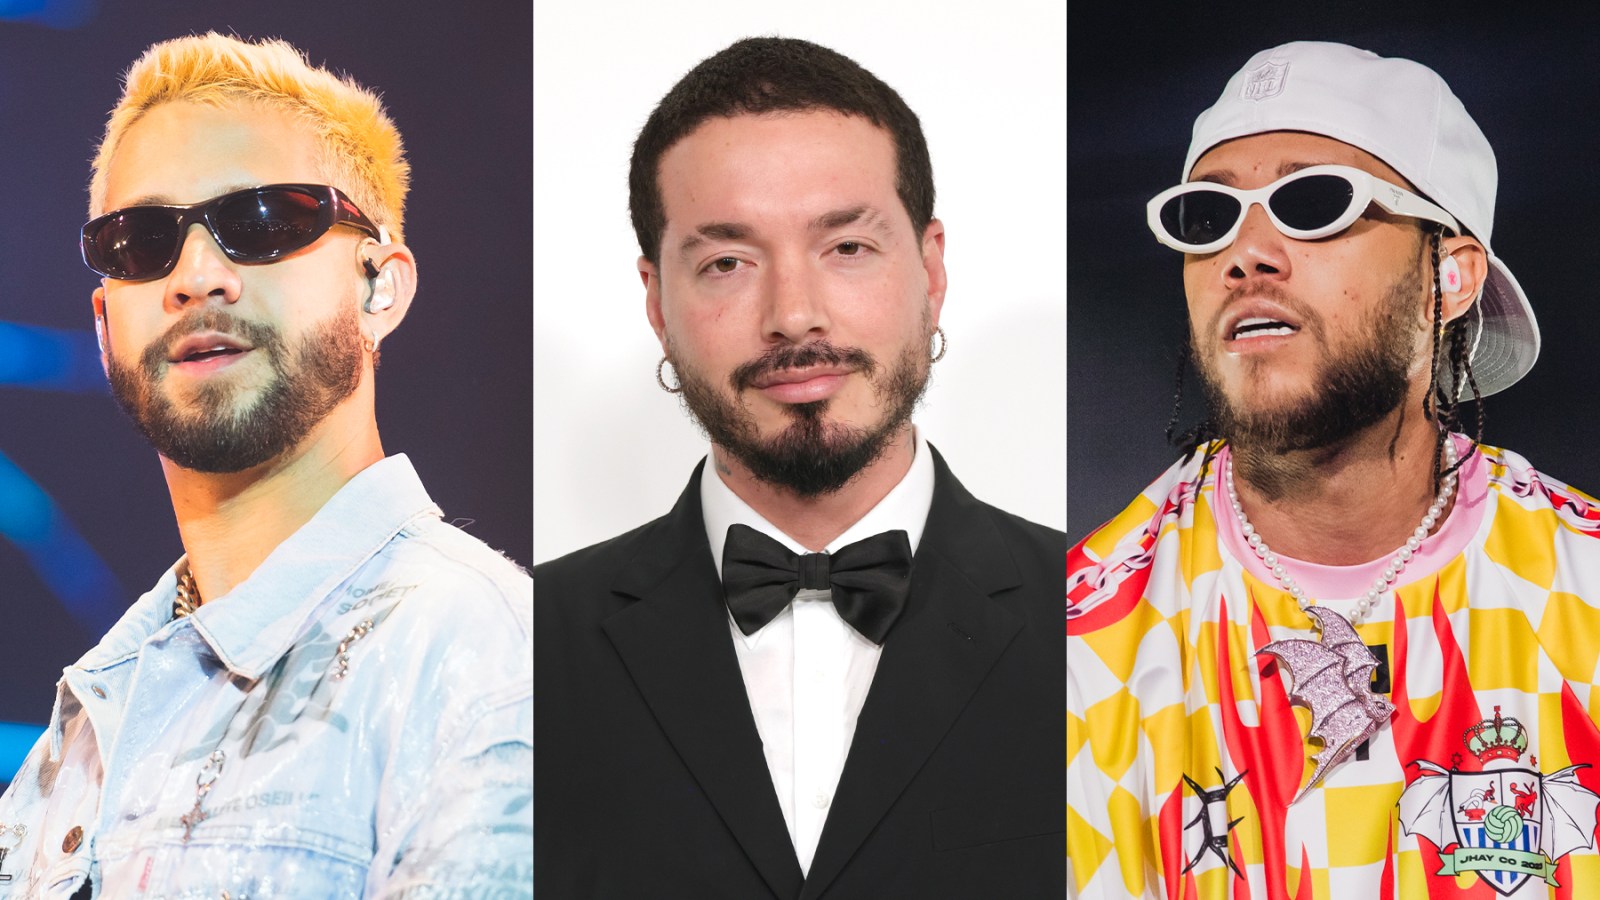 Jhayco Slams Mora and Accuses J Balvin of Stealing His Creative Concepts During Instagram Live Rant